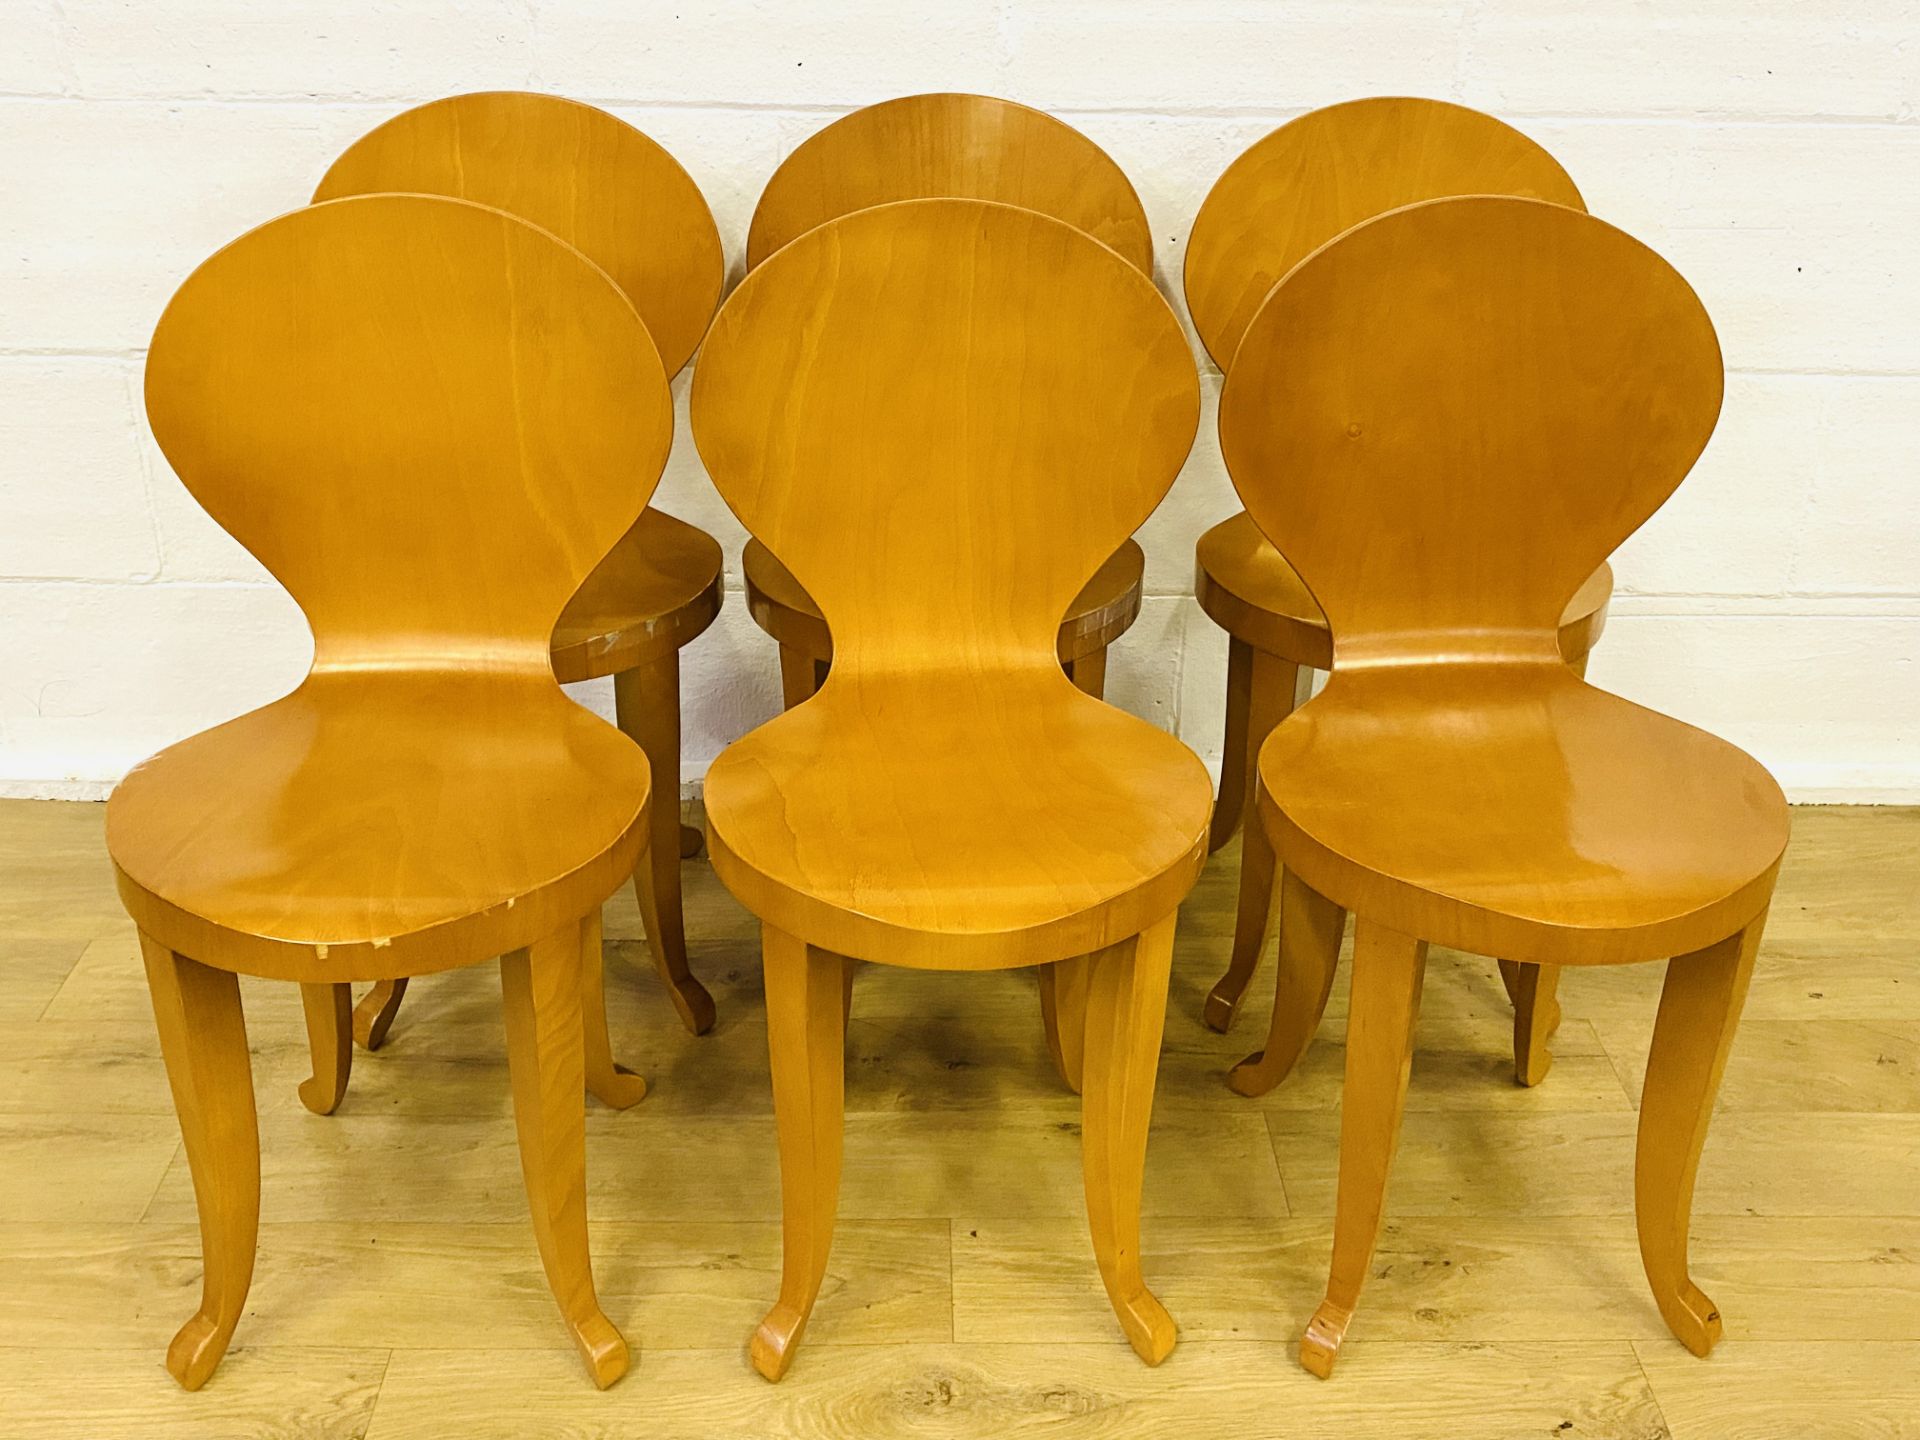 Six 'ant' style wood chairs